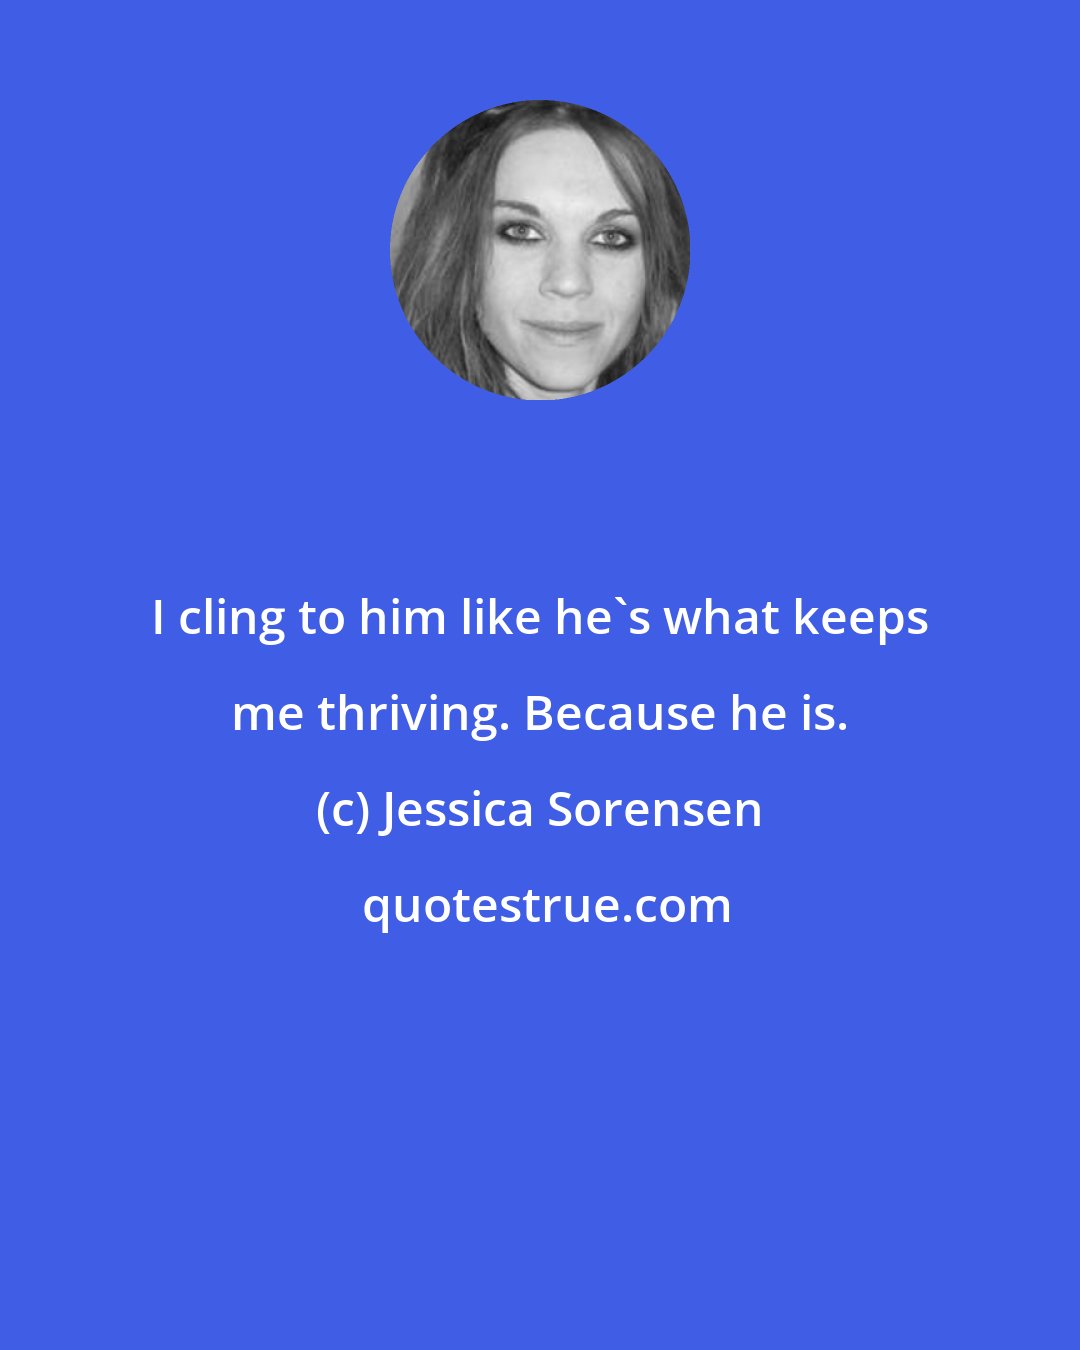 Jessica Sorensen: I cling to him like he's what keeps me thriving. Because he is.